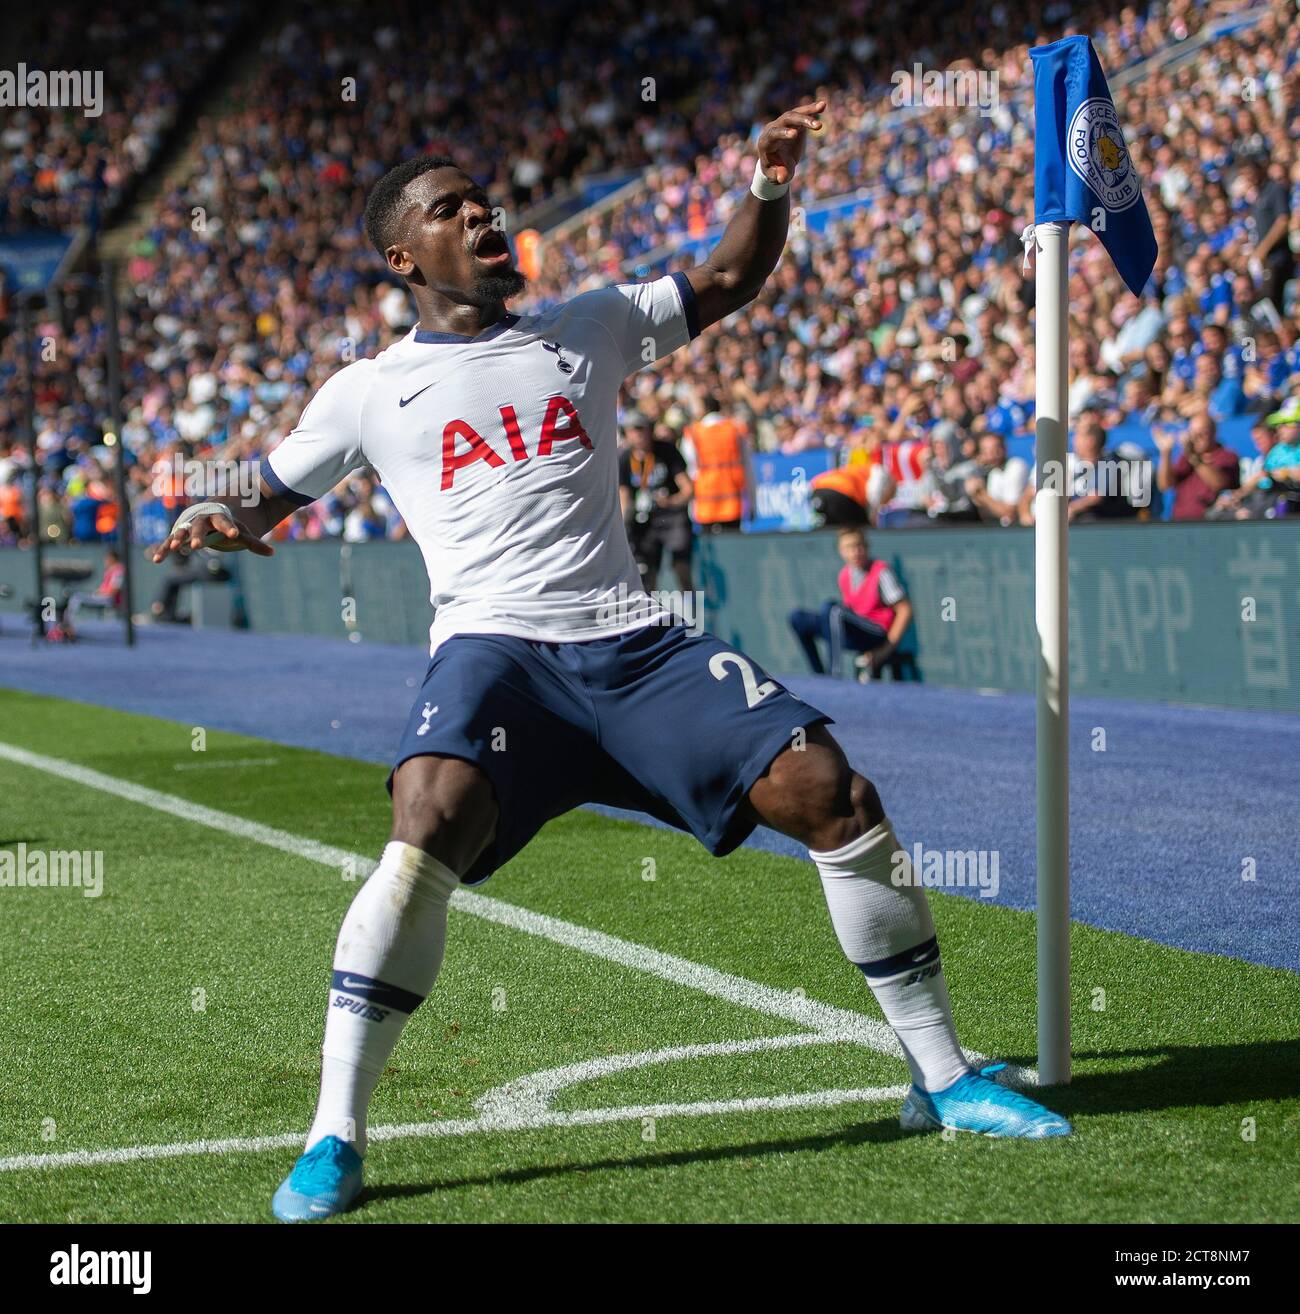 Tottenham Hotspurs' Serge Aurier celebrates his goal which was then disallowed by a VAR.  PHOTO CREDIT:  © MARK PAIN / ALAMY STOCK PHOTO Stock Photo